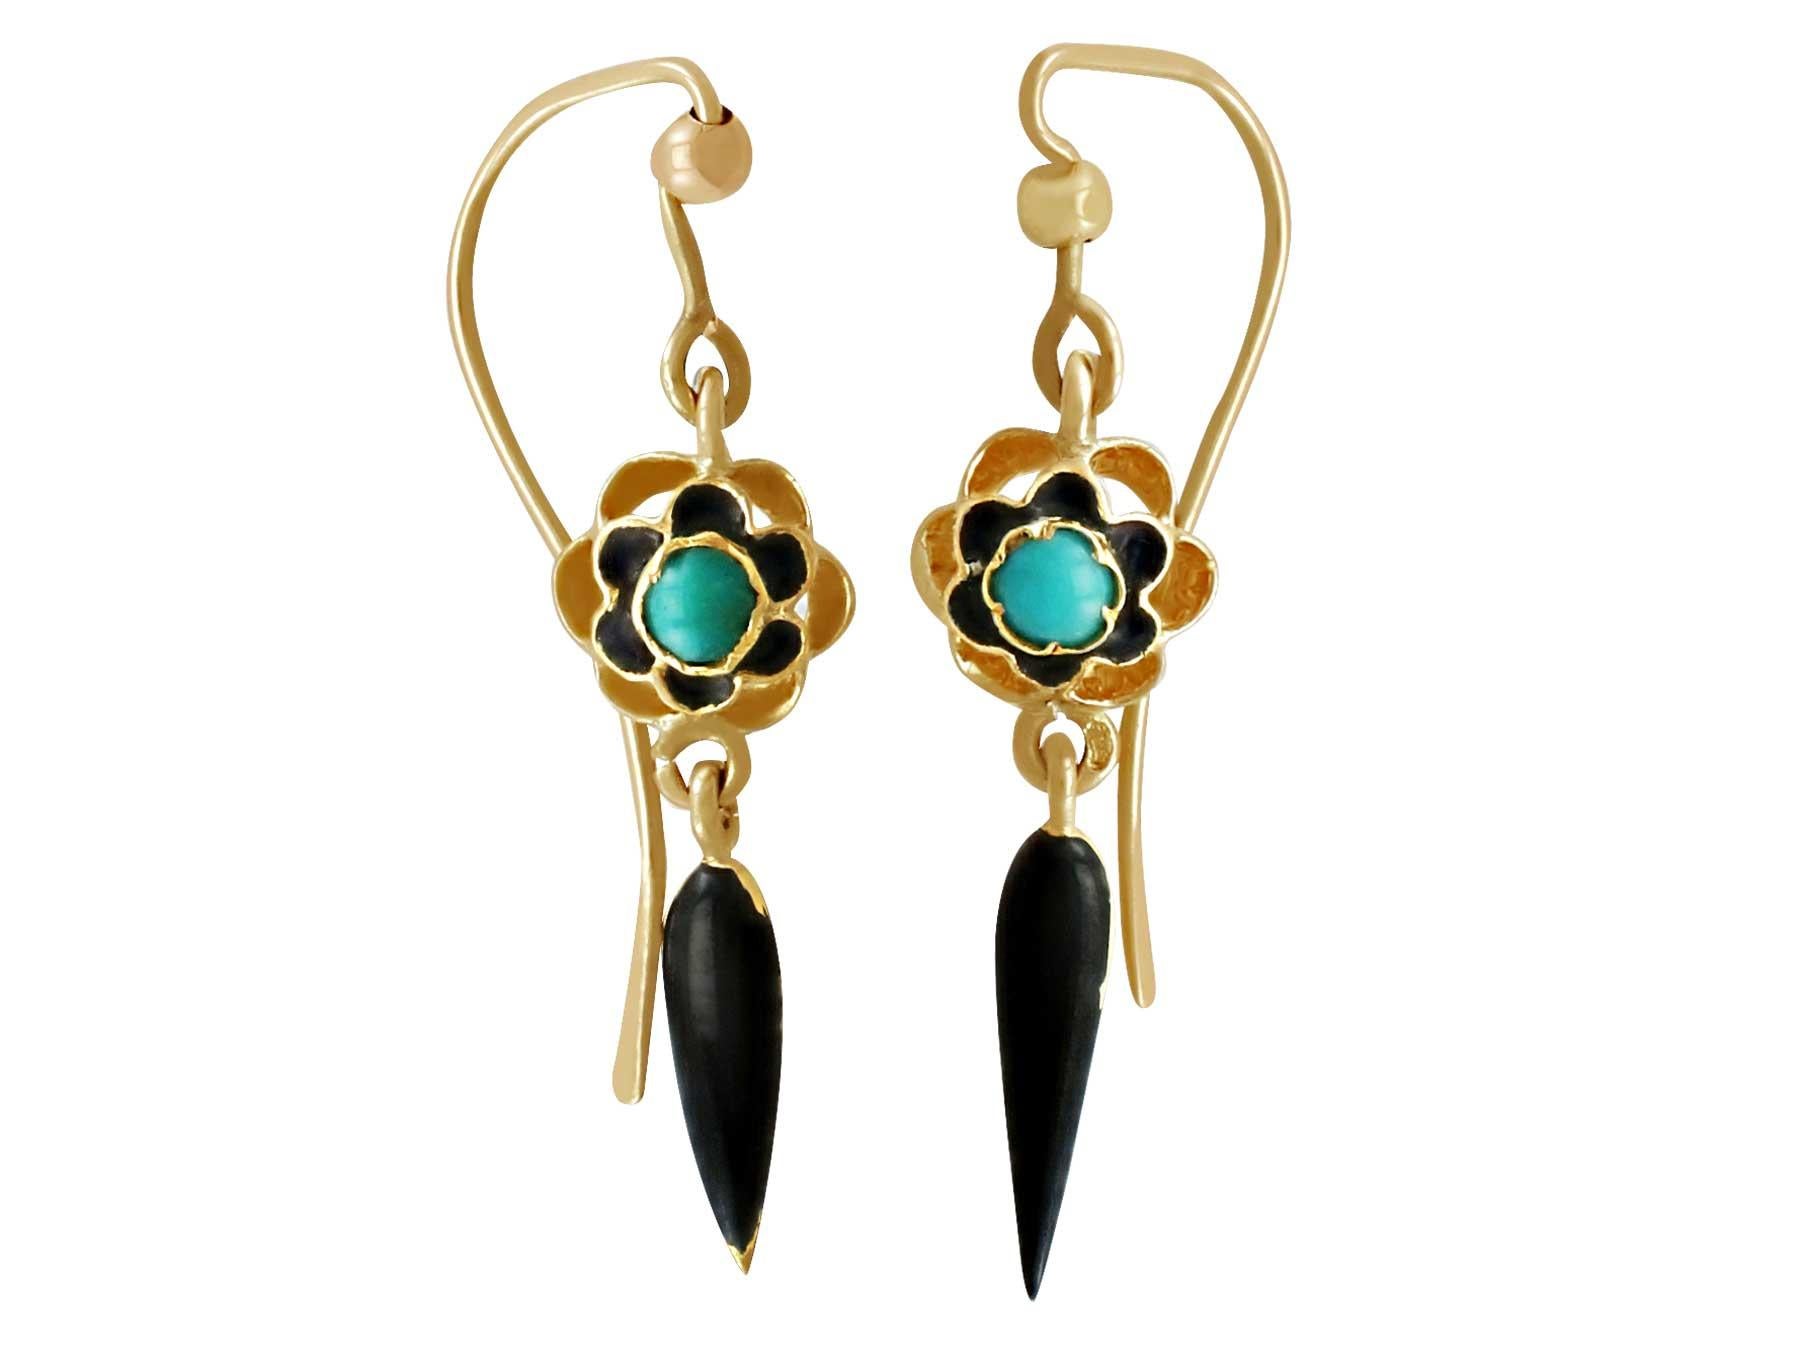 A fine and impressive pair of Victorian turquoise and enamel, 18 karat yellow gold drop earrings; part of our antique jewelry and estate jewelry collections.

These fine and impressive antique turquoise earrings are crafted in 18k yellow gold.

The